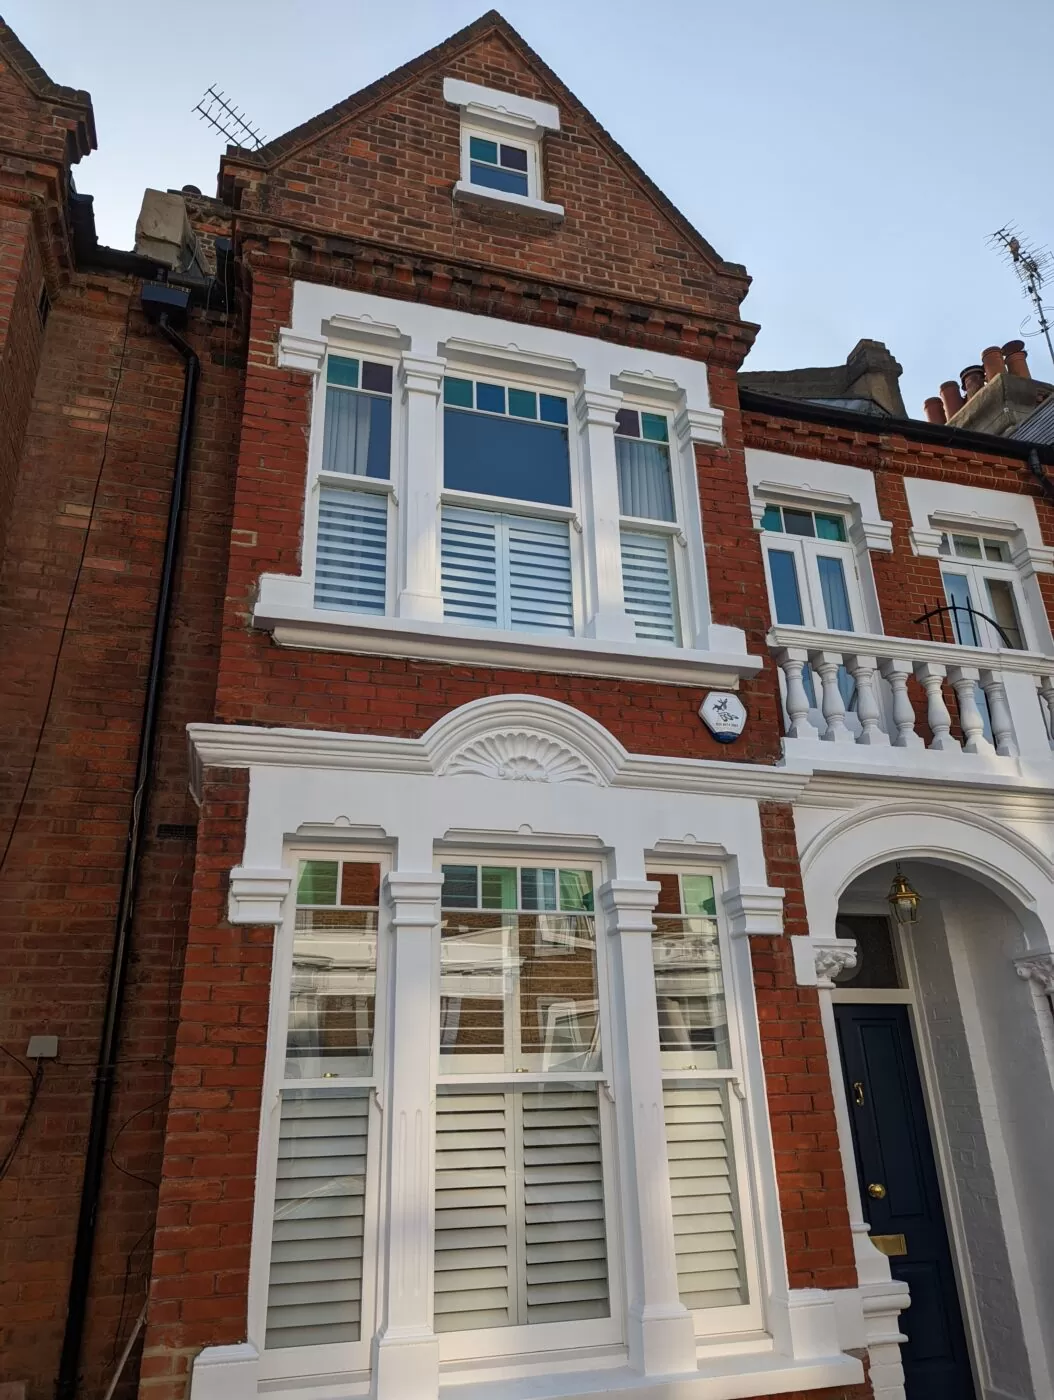 New wooden sash windows to improve family home